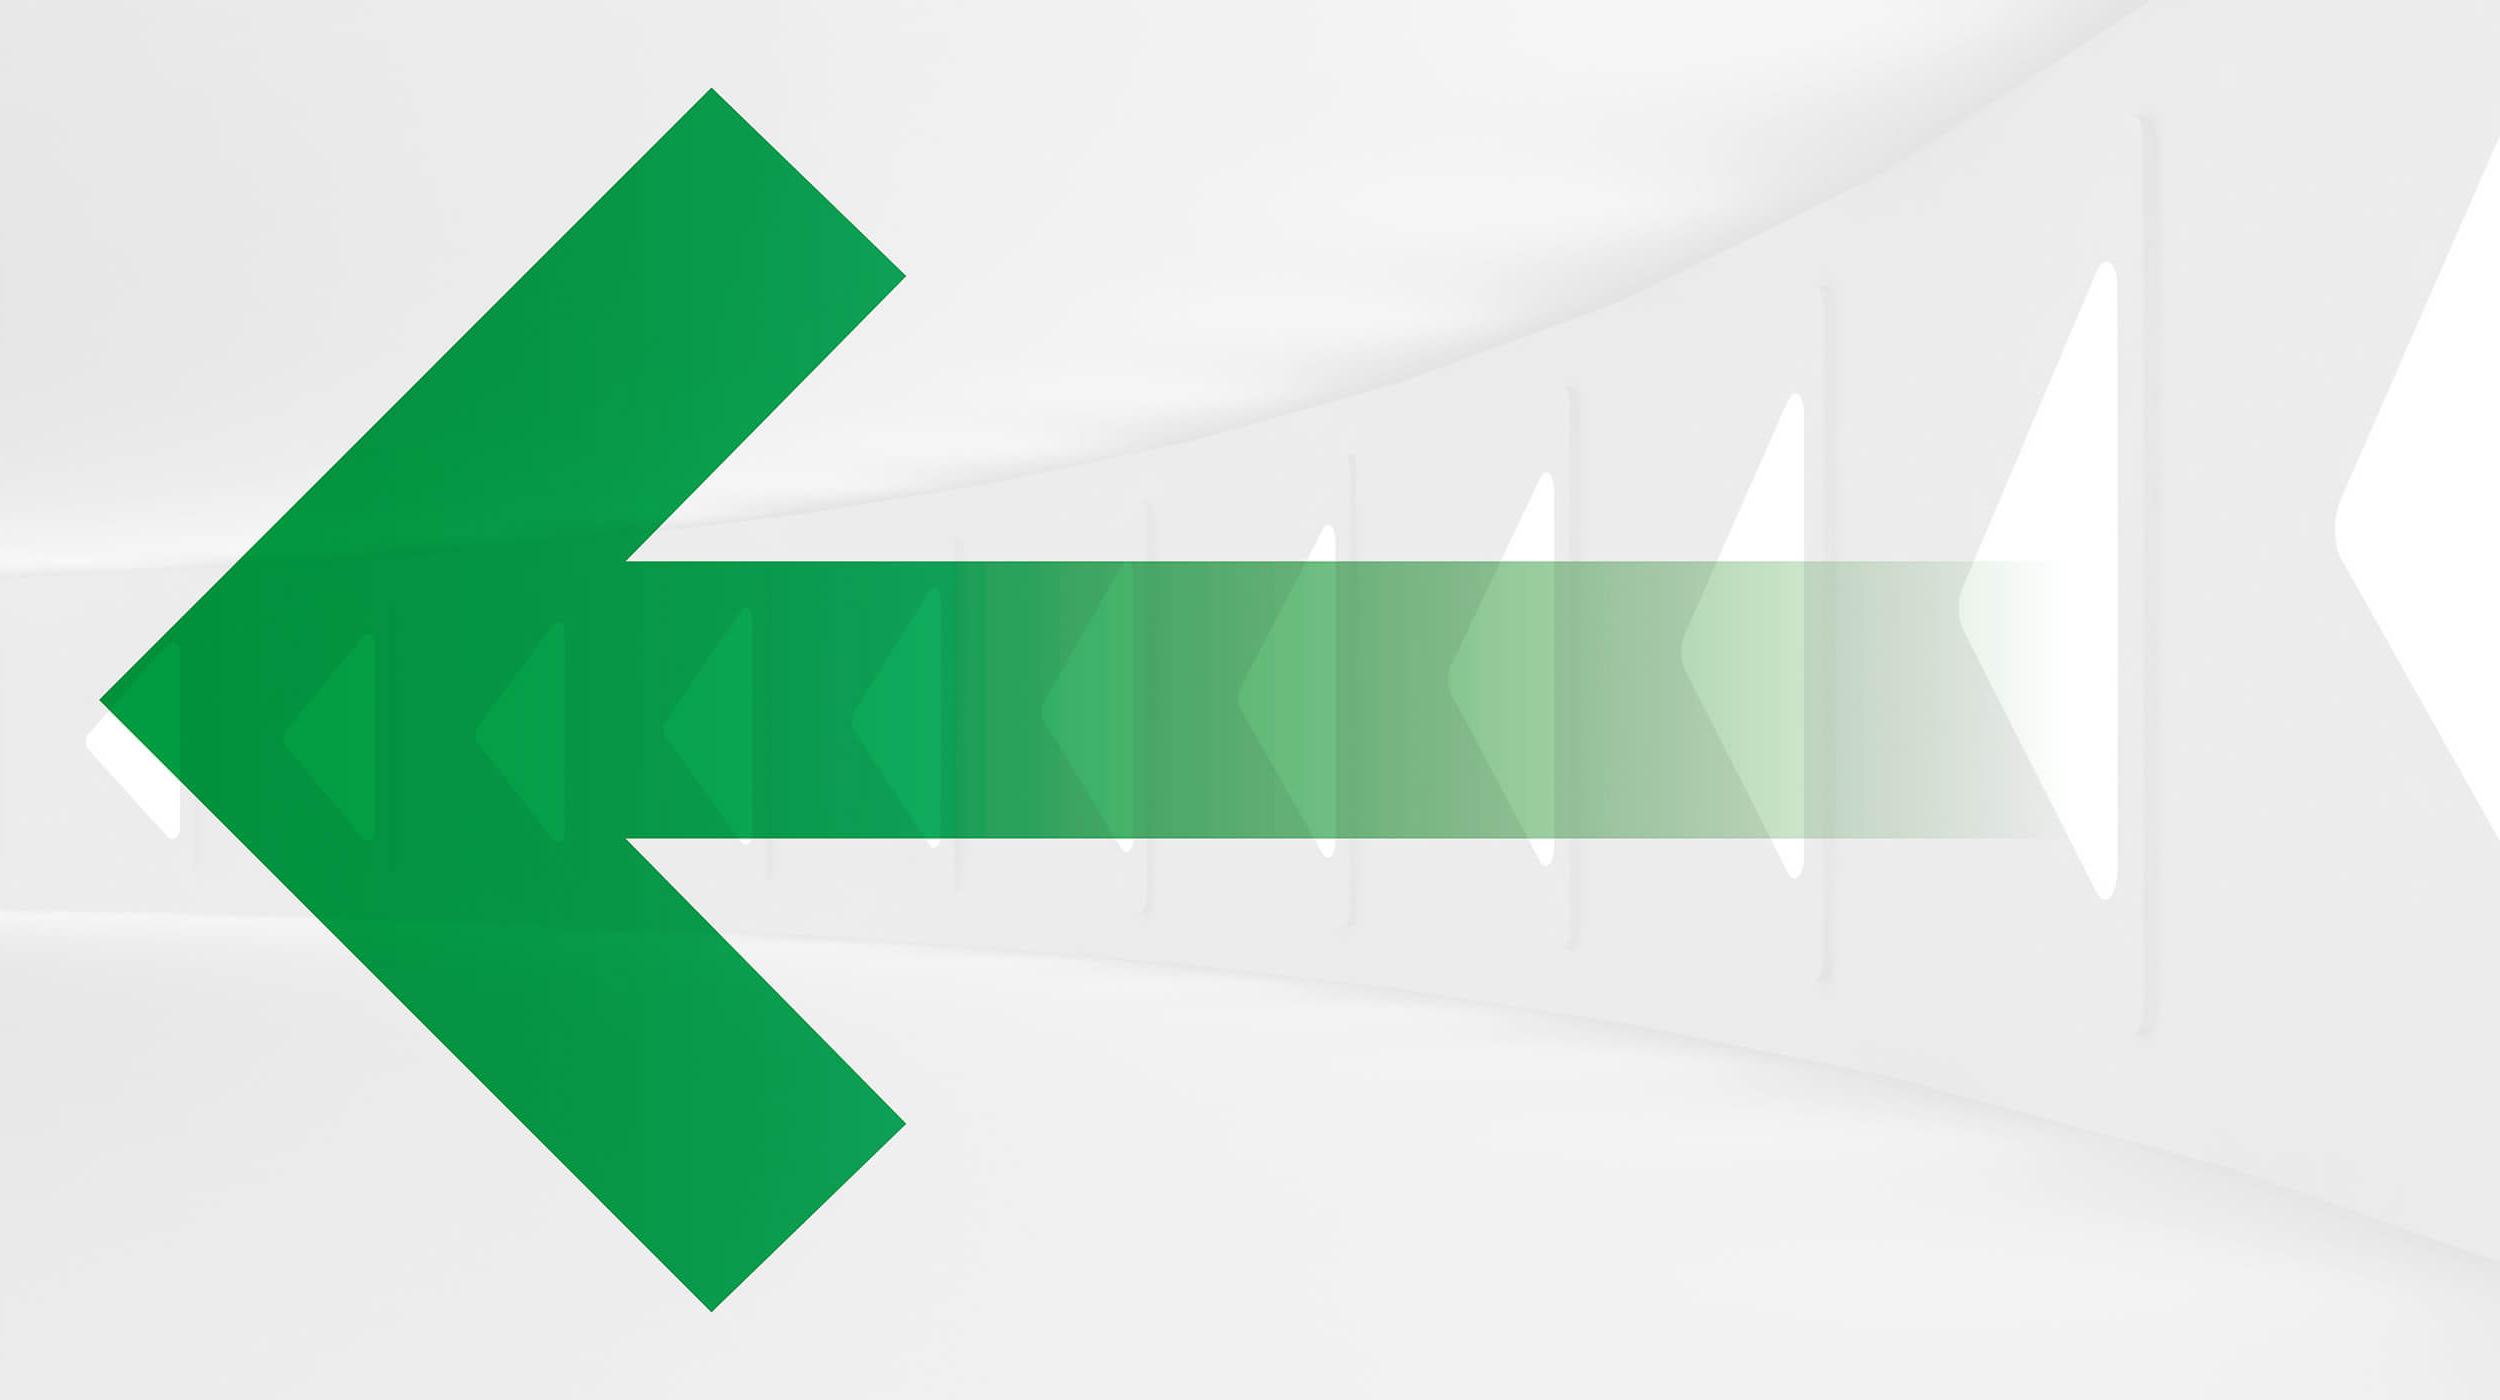 Large green arrow pointing to the right, on a white and grey background